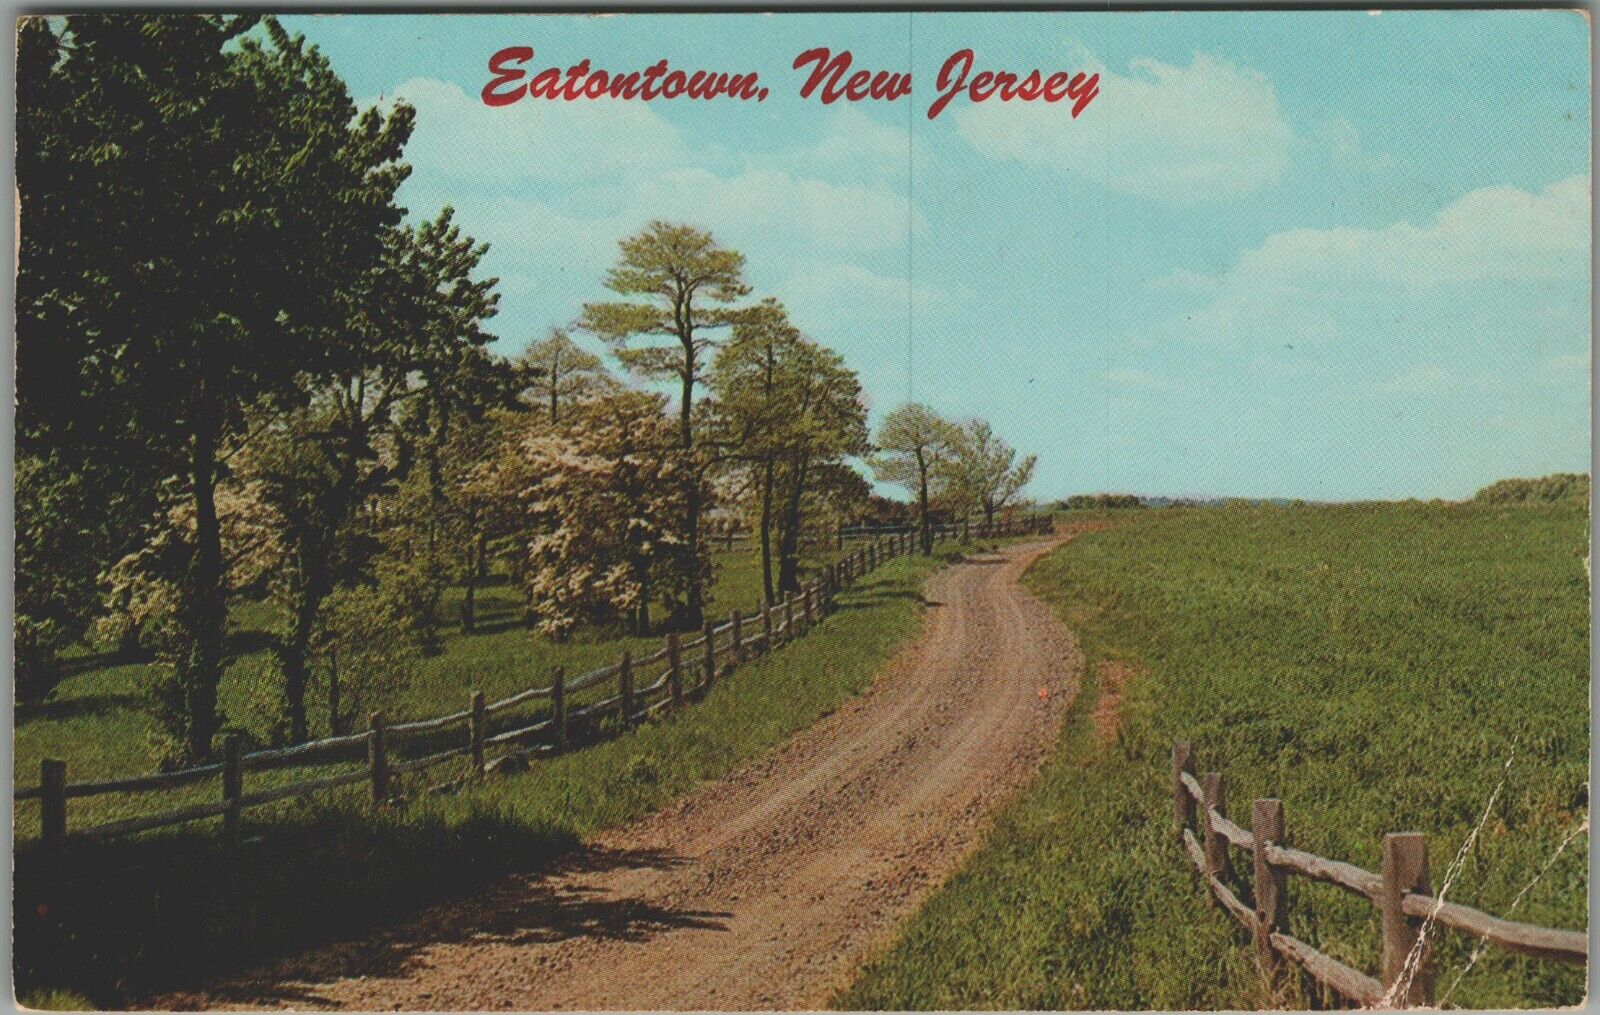 Eatontown New Jersey Winding Country Road Near Fort Monmouth p1964 Dennis